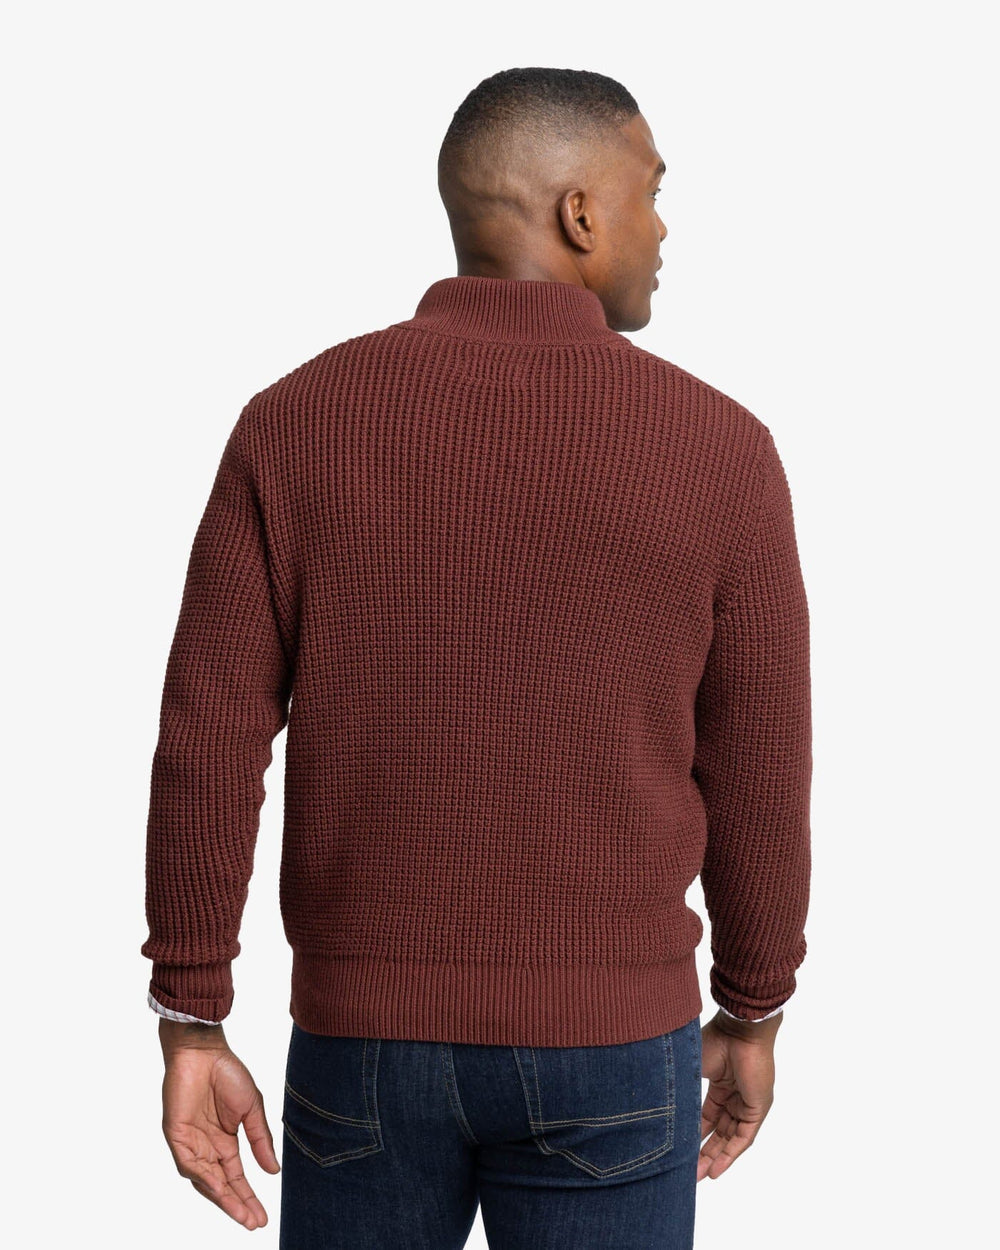 The back view of the Southern Tide Westmont Heather Jade Quarter Zip Button by Southern Tide - Heather Bordeaux Red